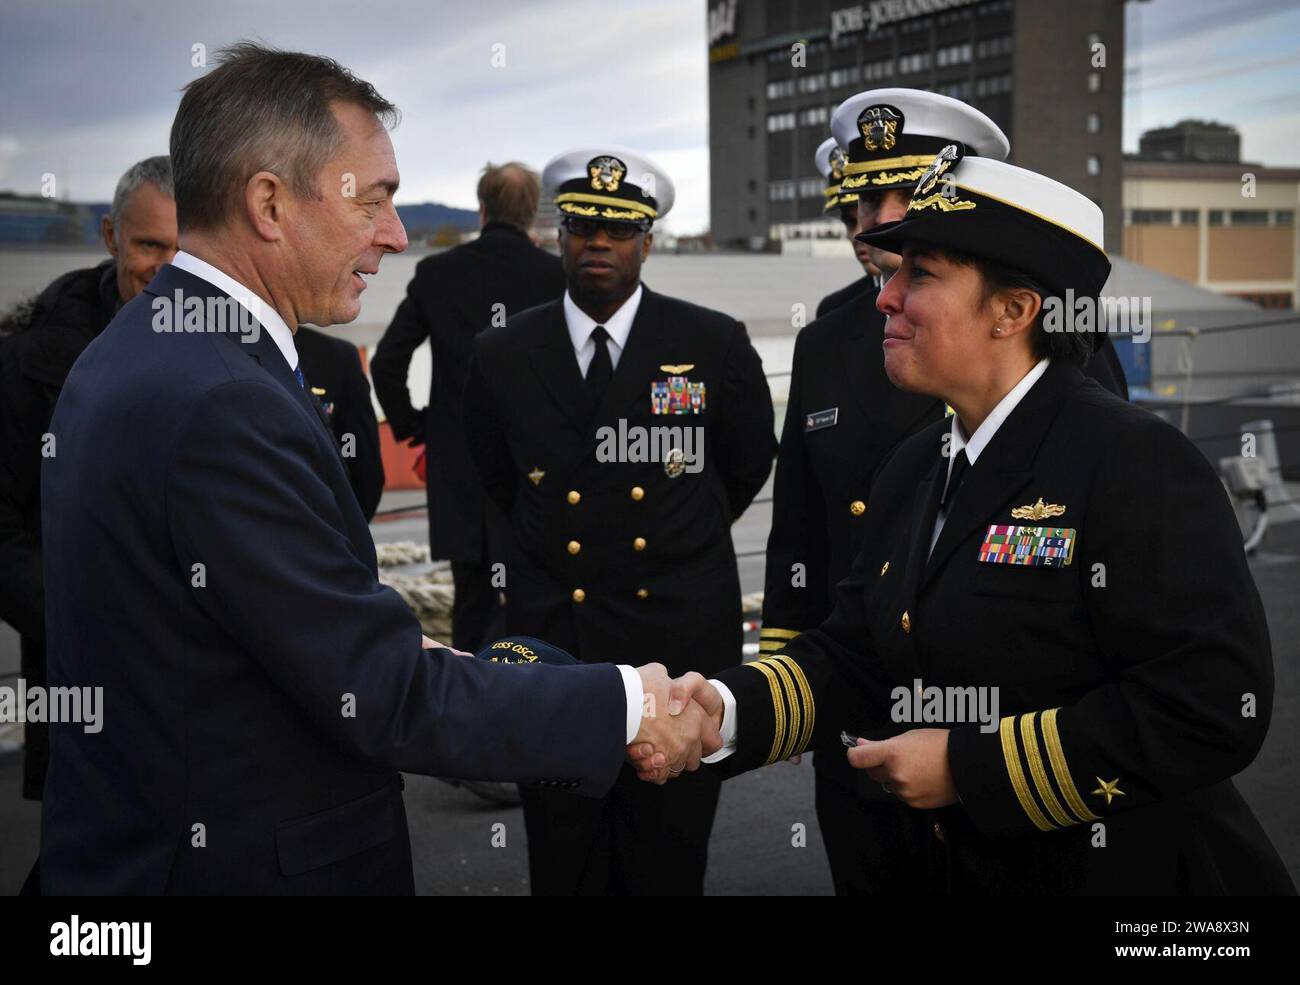 US military forces. 171030UY653-073  OSLO, Norway (Oct. 30, 2017) Cmdr. Samantha Dutily,  commanding officer of the Arleigh Burke-class guided-missile destroyer USS Oscar Austin (DDG 79), shakes hands with Norwegian Defense Minister Frank Bakke-Jensen  Oct. 30, 2017. Oscar Austin is on a routine deployment supporting U.S. national security interests in Europe, and increasing theater security cooperation and forward naval presence in the U.S. 6th Fleet area of operations. (U.S. Navy photo by Mass Communication Specialist 2nd Class Ryan Utah Kledzik/Released) Stock Photo